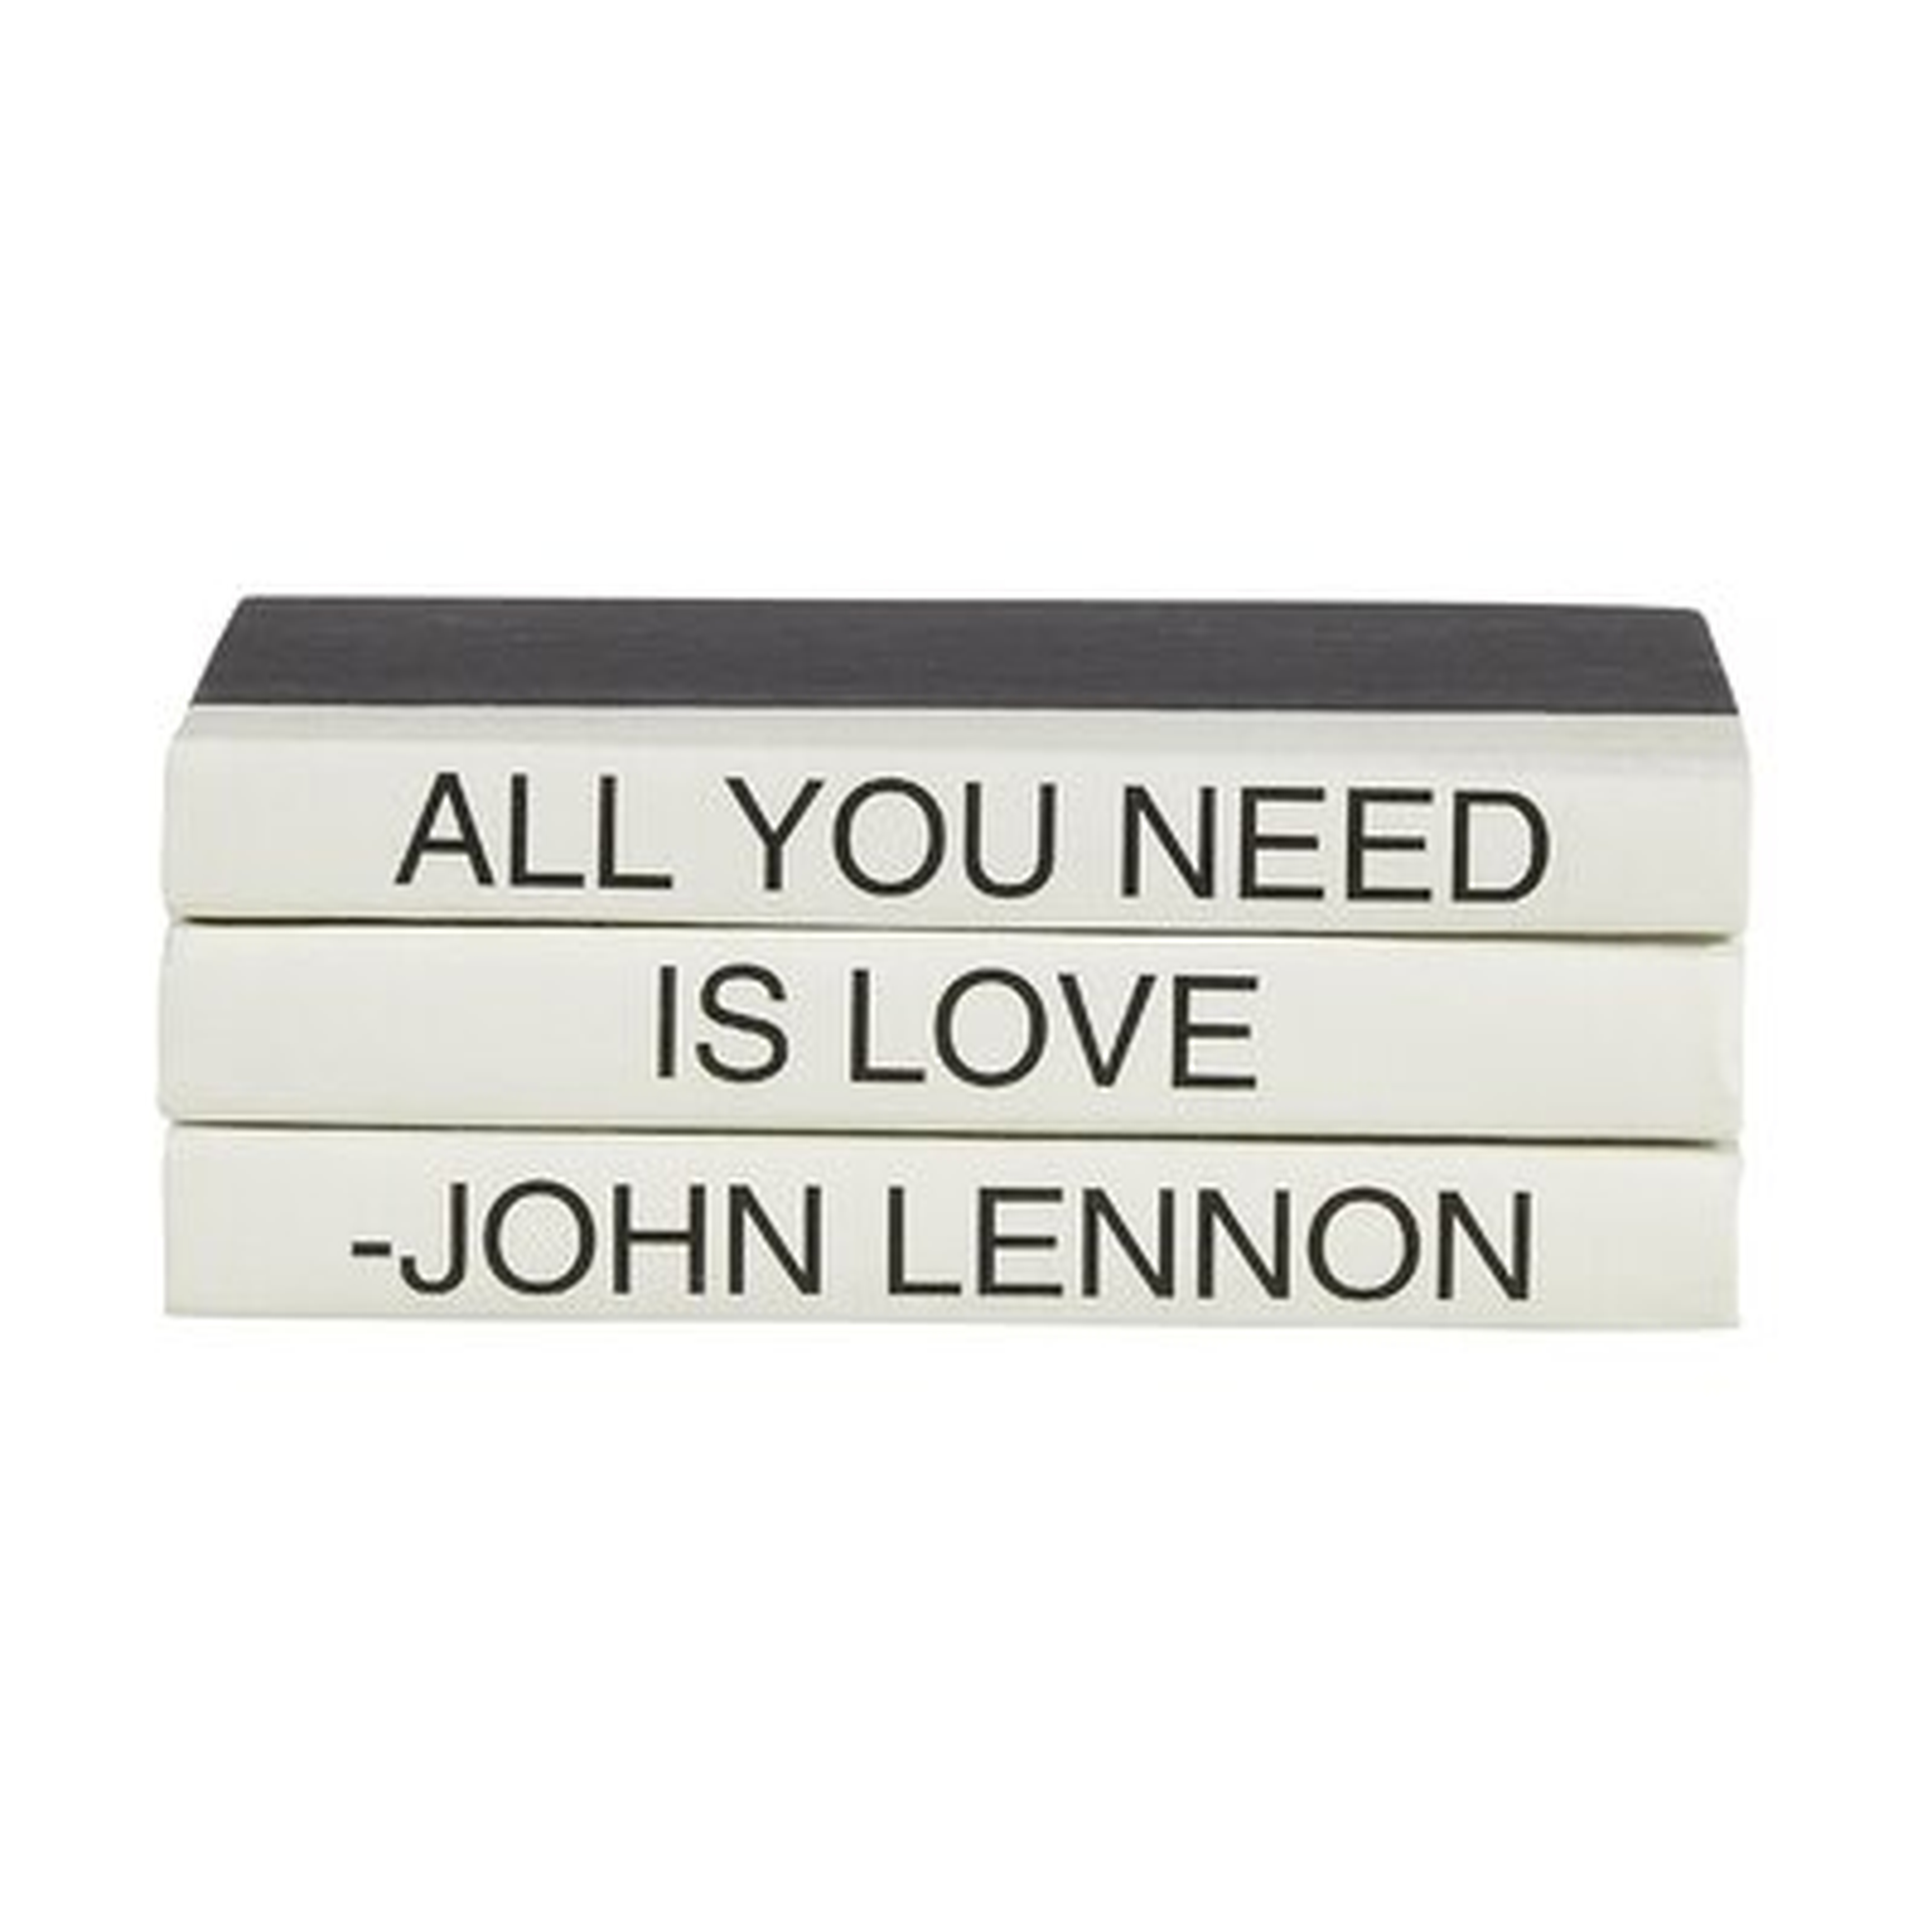 3 Piece All You Need Is Love Quote Decorative Book Set - Wayfair